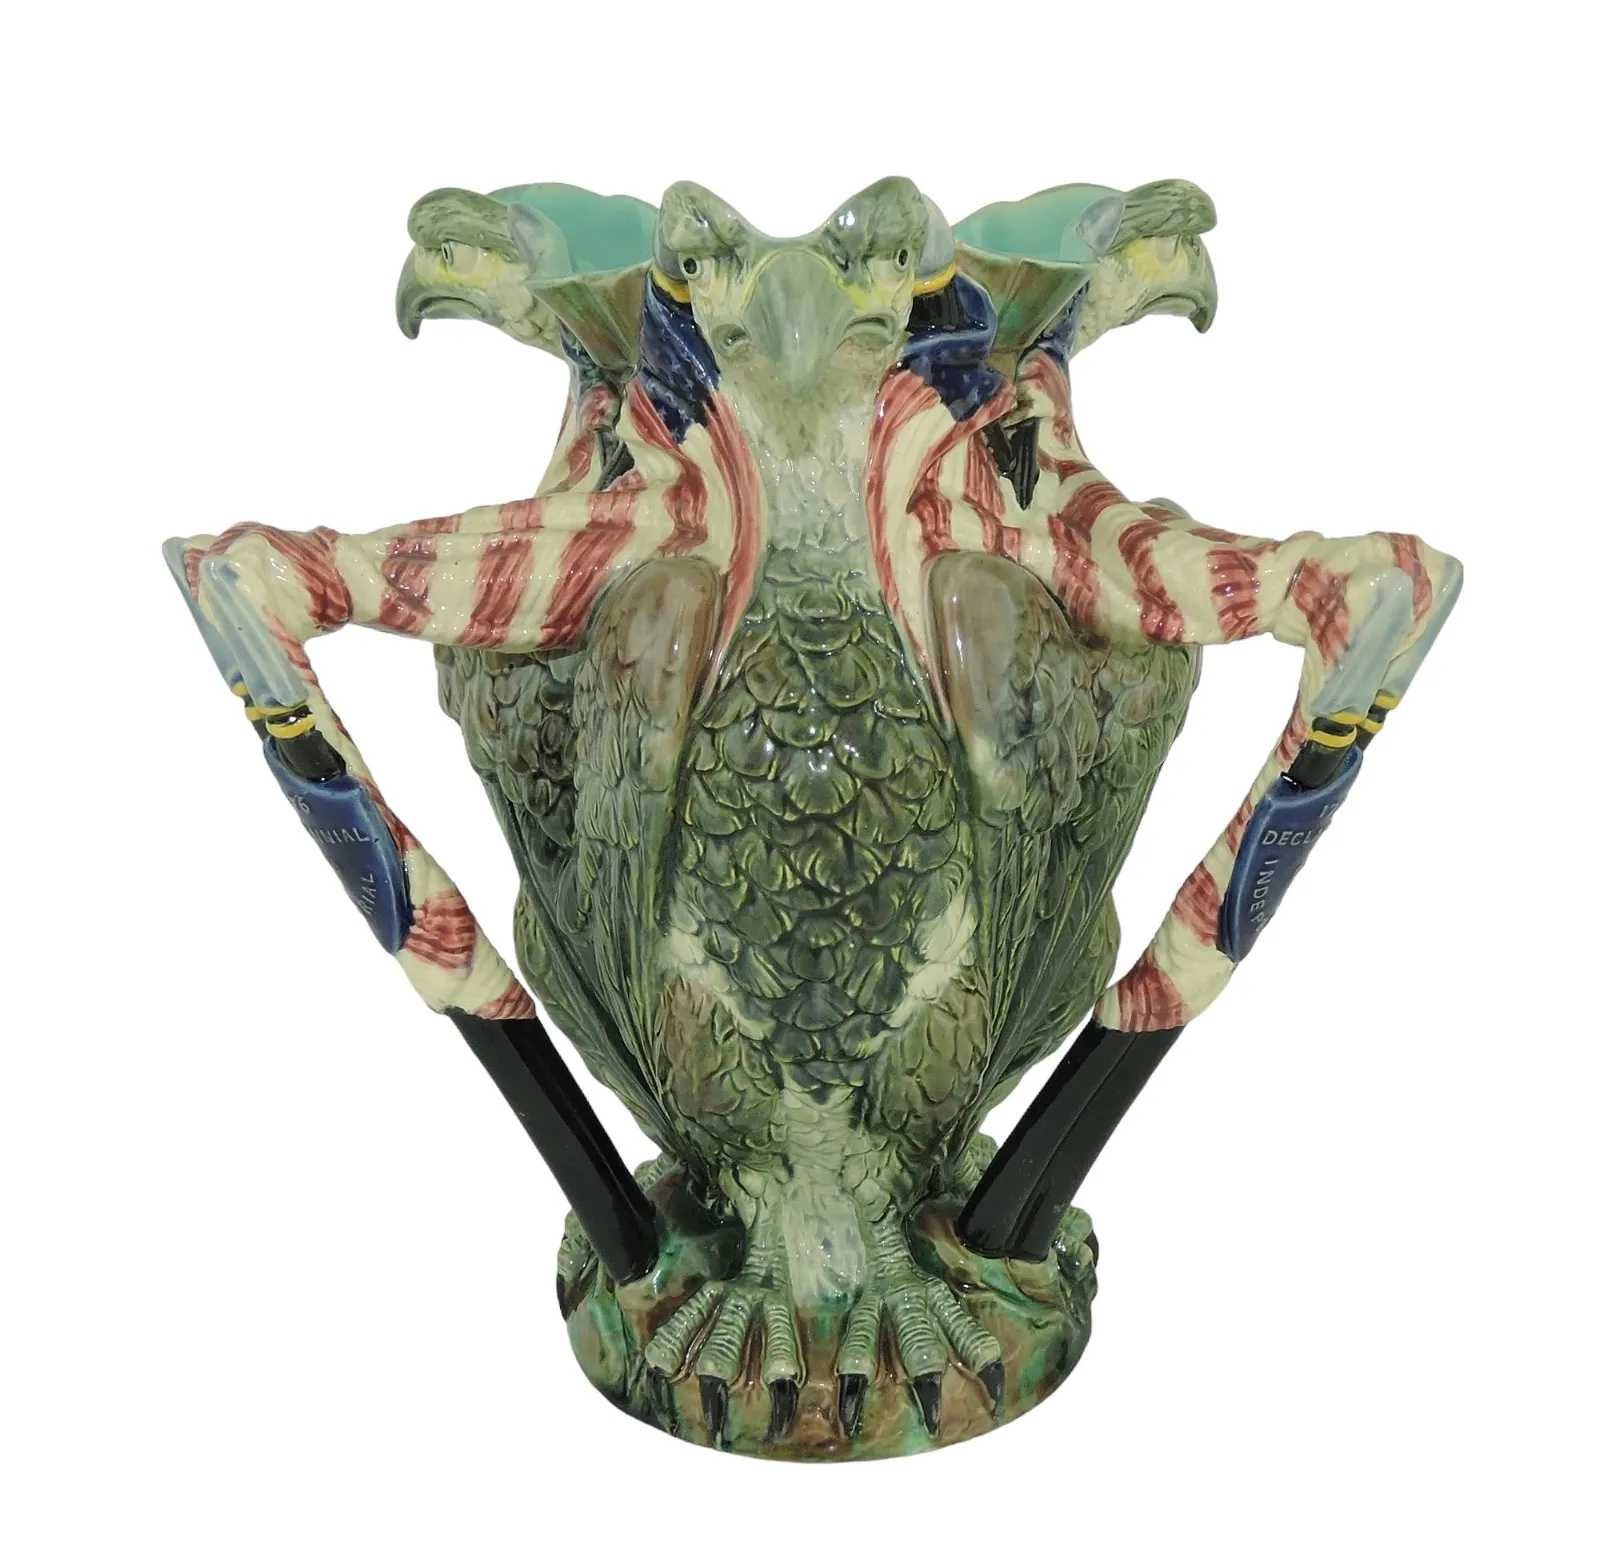 Copeland Majolica 1876 Memorial Vase, which sold for $15,000 ($18,600 with buyer's premium) at Strawser.